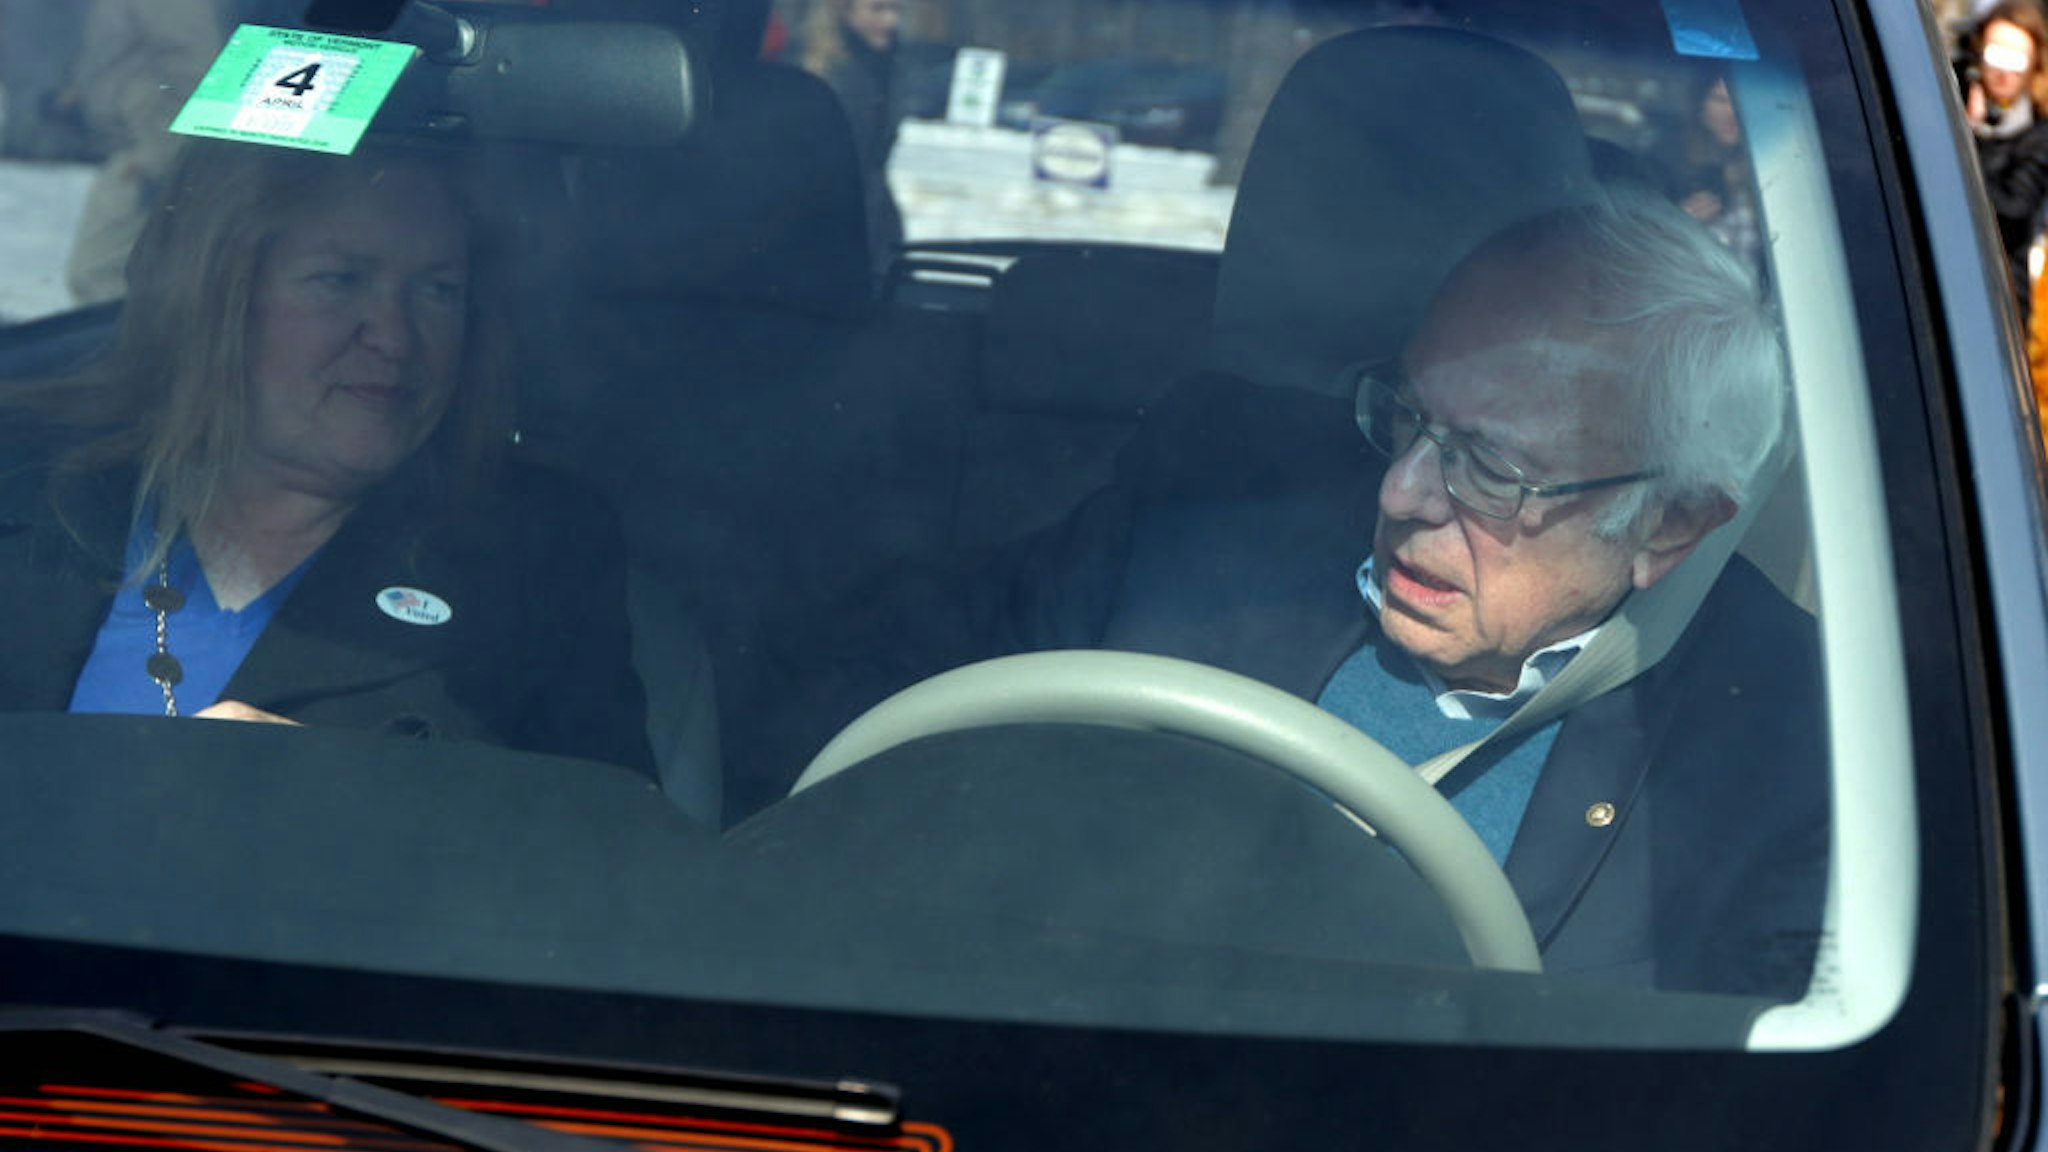 Democratic presidential candidate Sen. Bernie Sanders (I-VT) fastens his seat belt in his vehicle as his wife Jane O'Meara Sanders looks on after they casted their votes at a polling place at Robert Miller Community Center March 3, 2020 in Burlington, Vermont. 1,357 Democratic delegates are at stake as voters cast their ballots in 14 states and American Samoa on what is known as Super Tuesday. (Photo by Alex Wong/Getty Images)